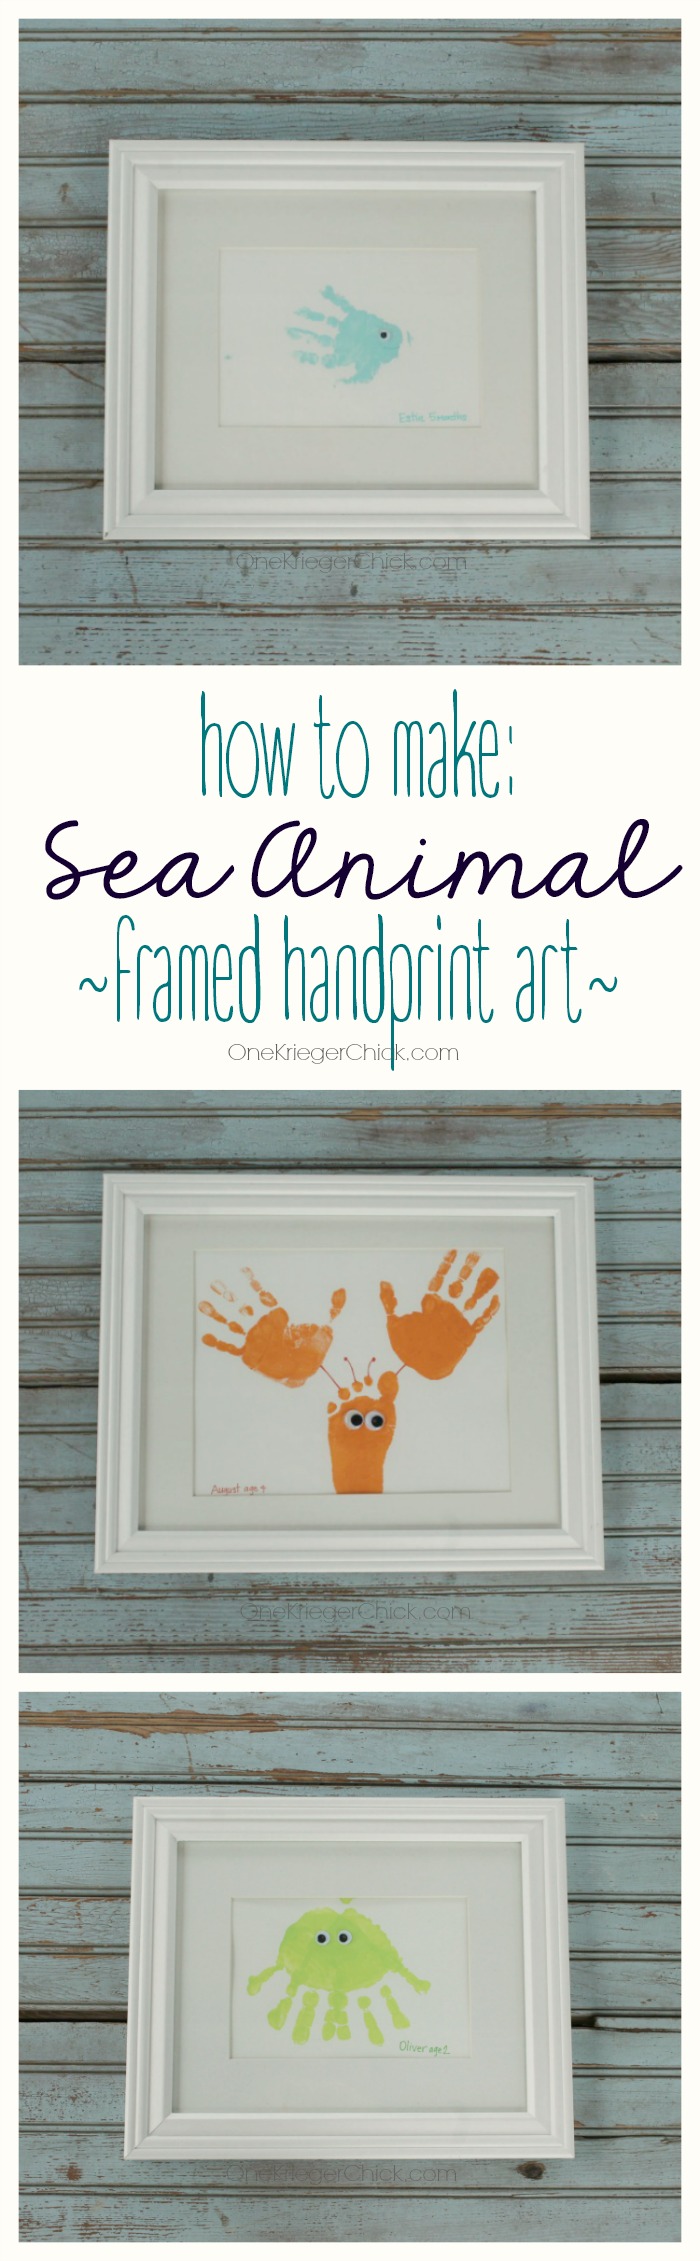 How to Make Sea Animal Framed Handprint Art by One Krieger Chick | Mabey She Made It | #handprint #decor #seaanimal